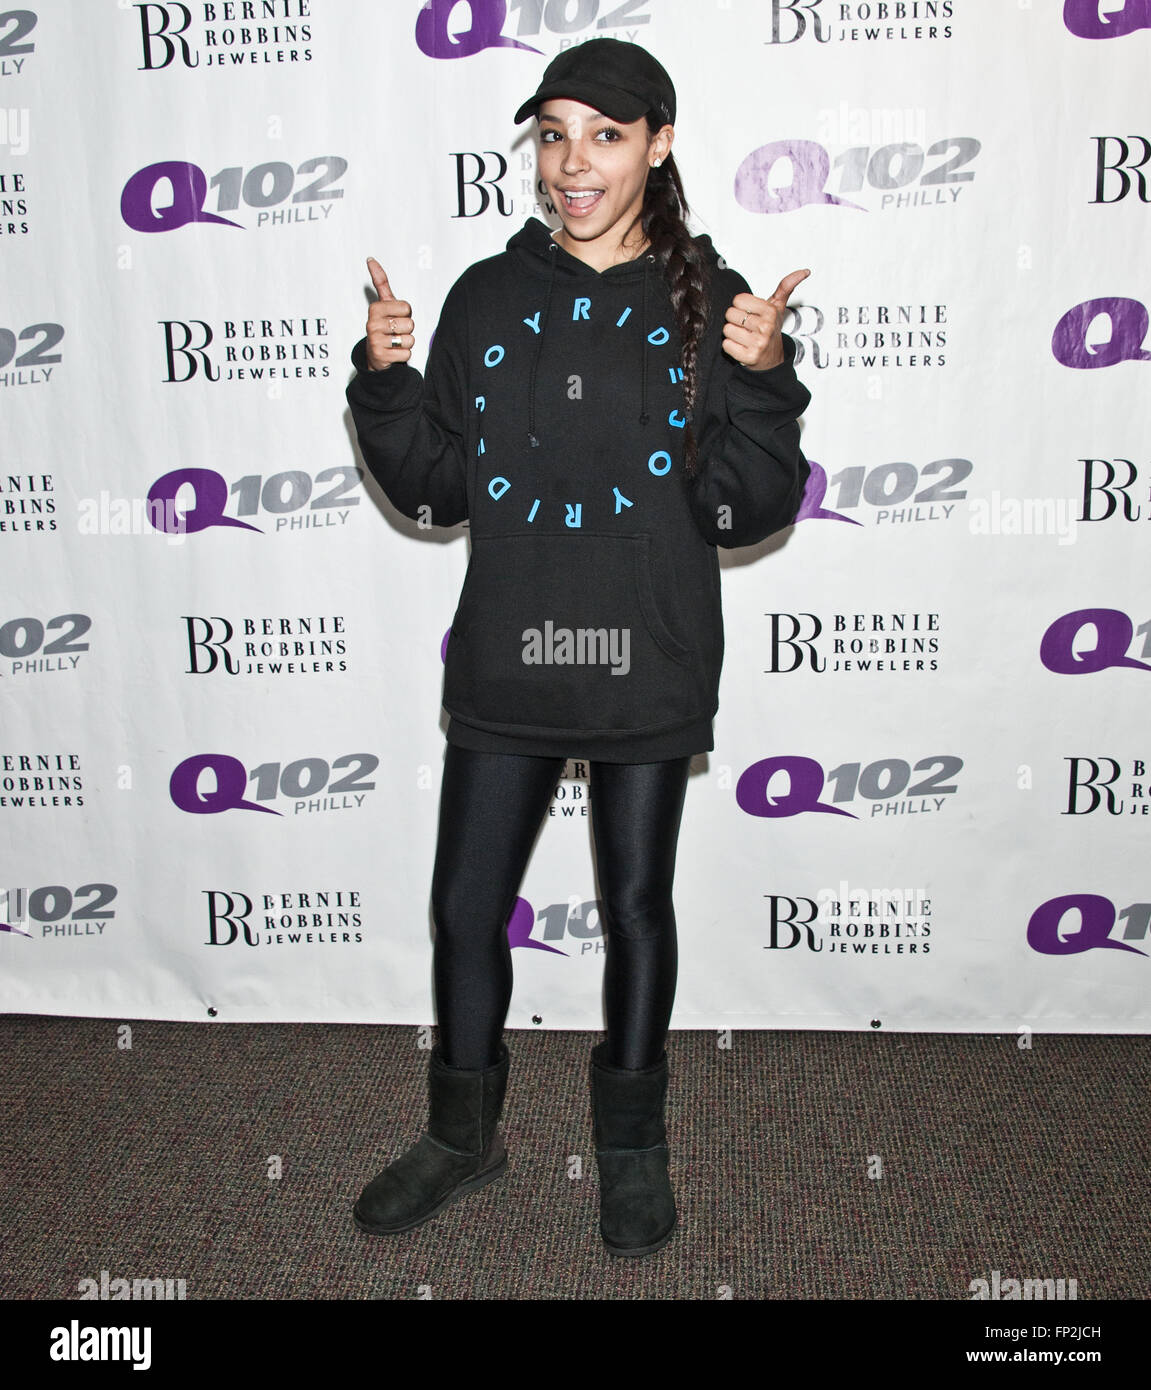 Bala Cynwyd, Pennsylvania, USA. 15 mars, 2016. American Singer-Songwriter Visites Tinashe Q102's Performance Theatre. Banque D'Images